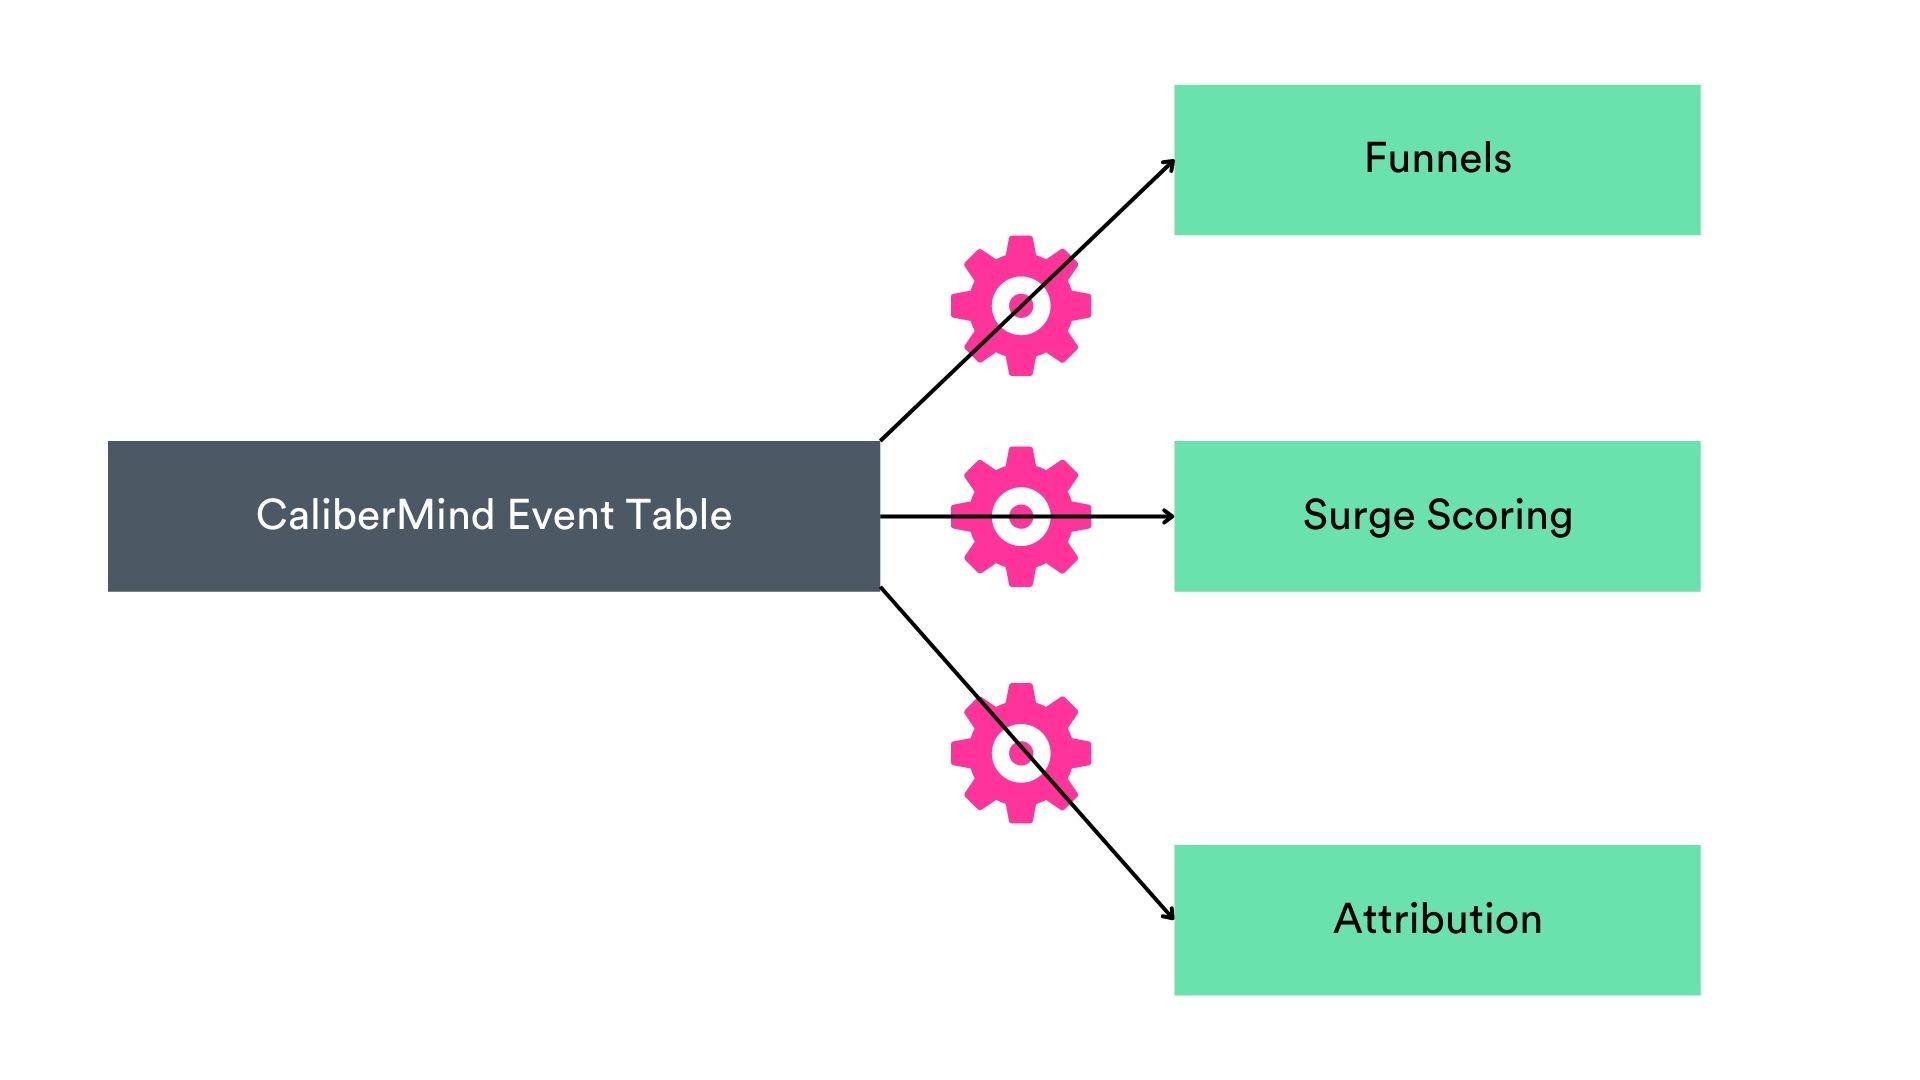 calibermind events are central to data models